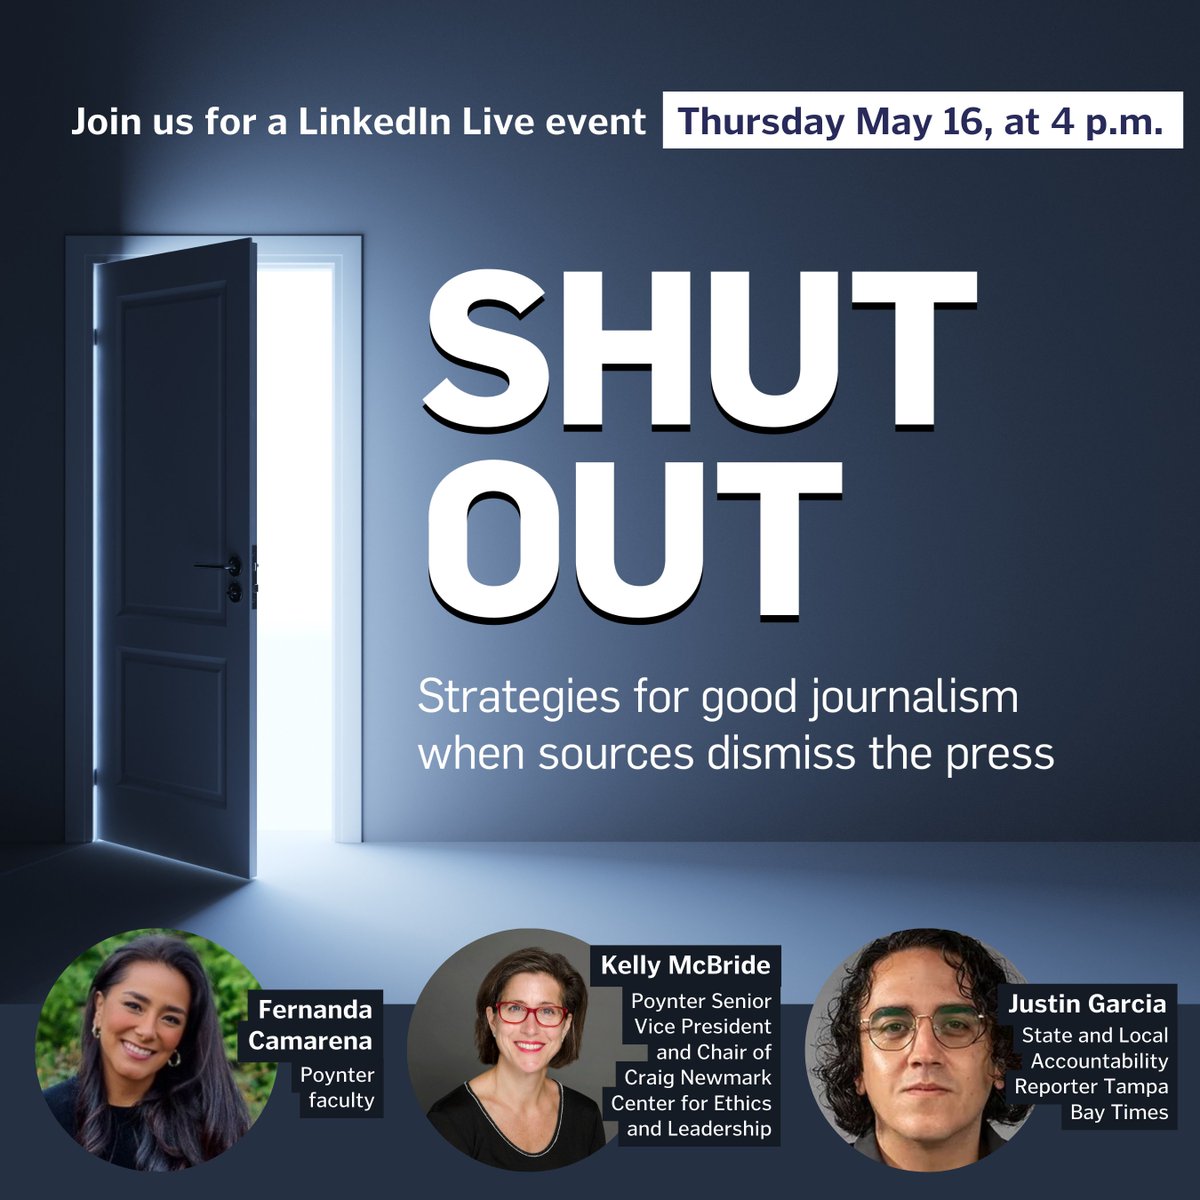 Join us on May 16 at 4 p.m. for a talk with @TB_Times reporter @JustinGarciaFL and Poynter's @kellymcb and @FernandaCamare on how journalists can get their work done even when sources deny access. linkedin.com/events/7191887…